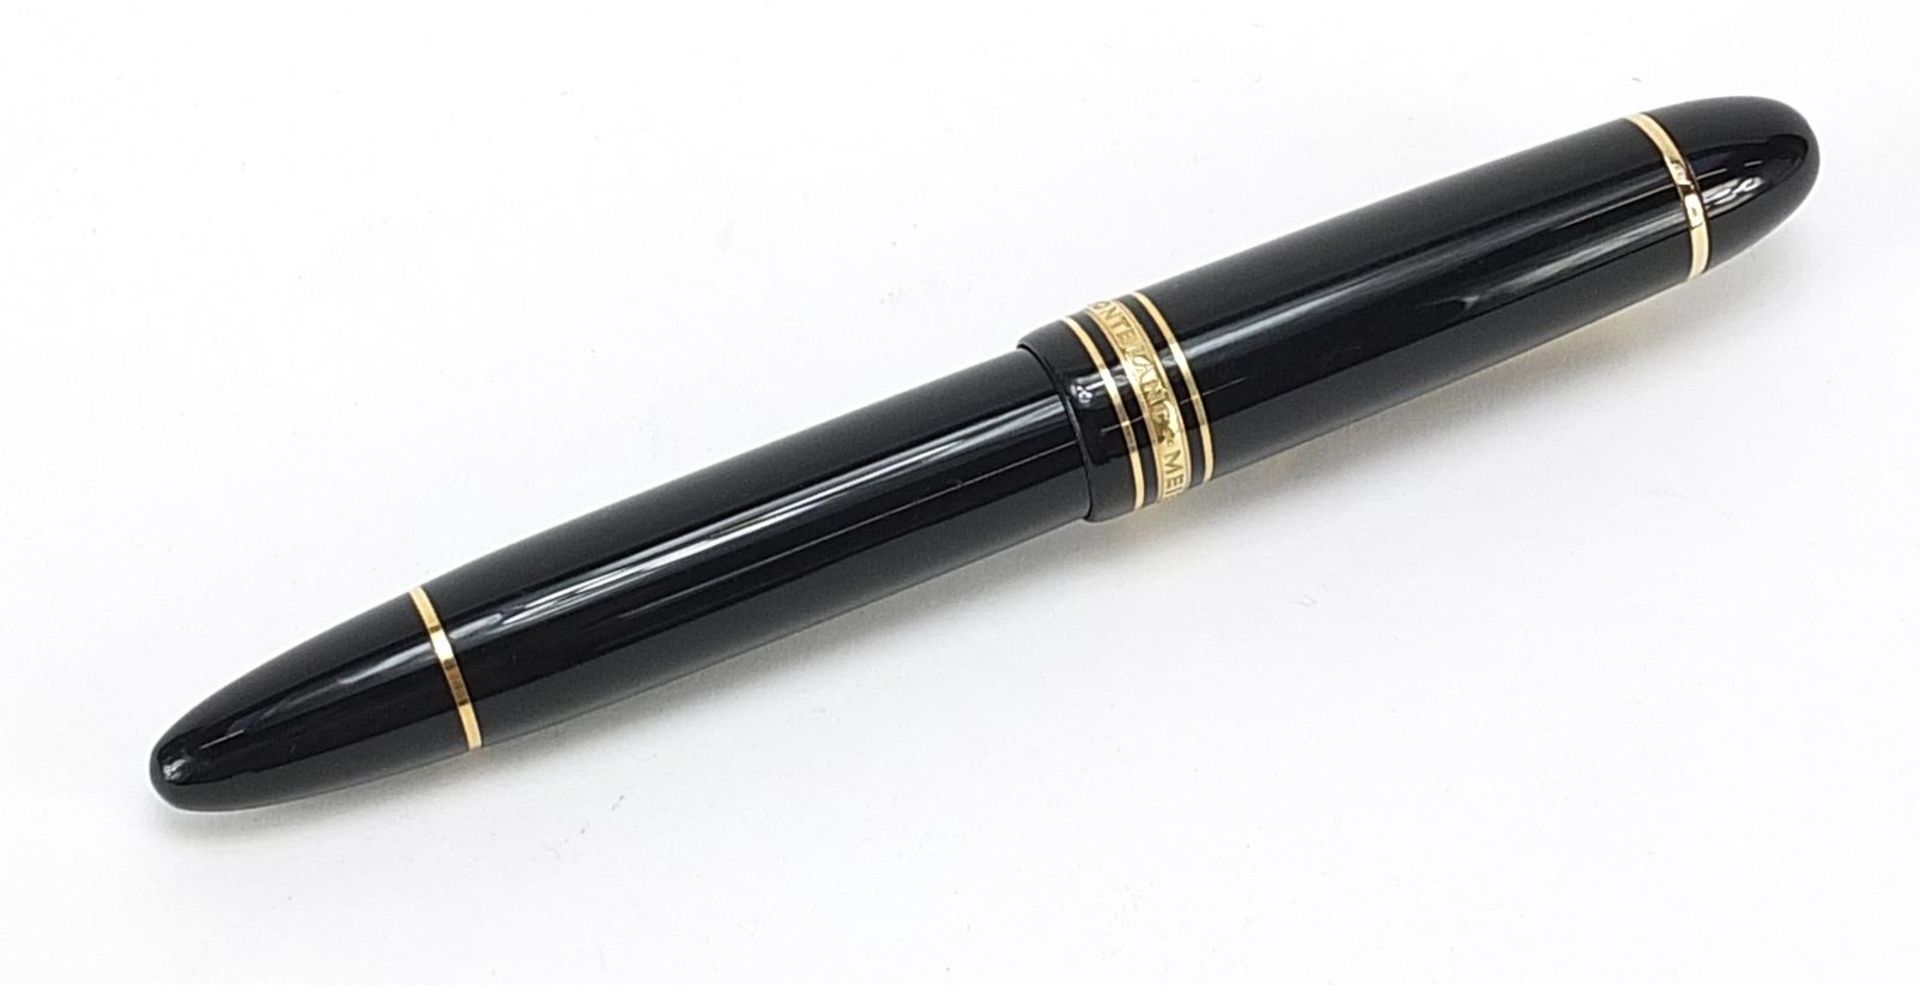 Mont Blanc Meisterstuck no 149 fountain pen and 14k gold nib and accessories including case and ink - Image 3 of 6